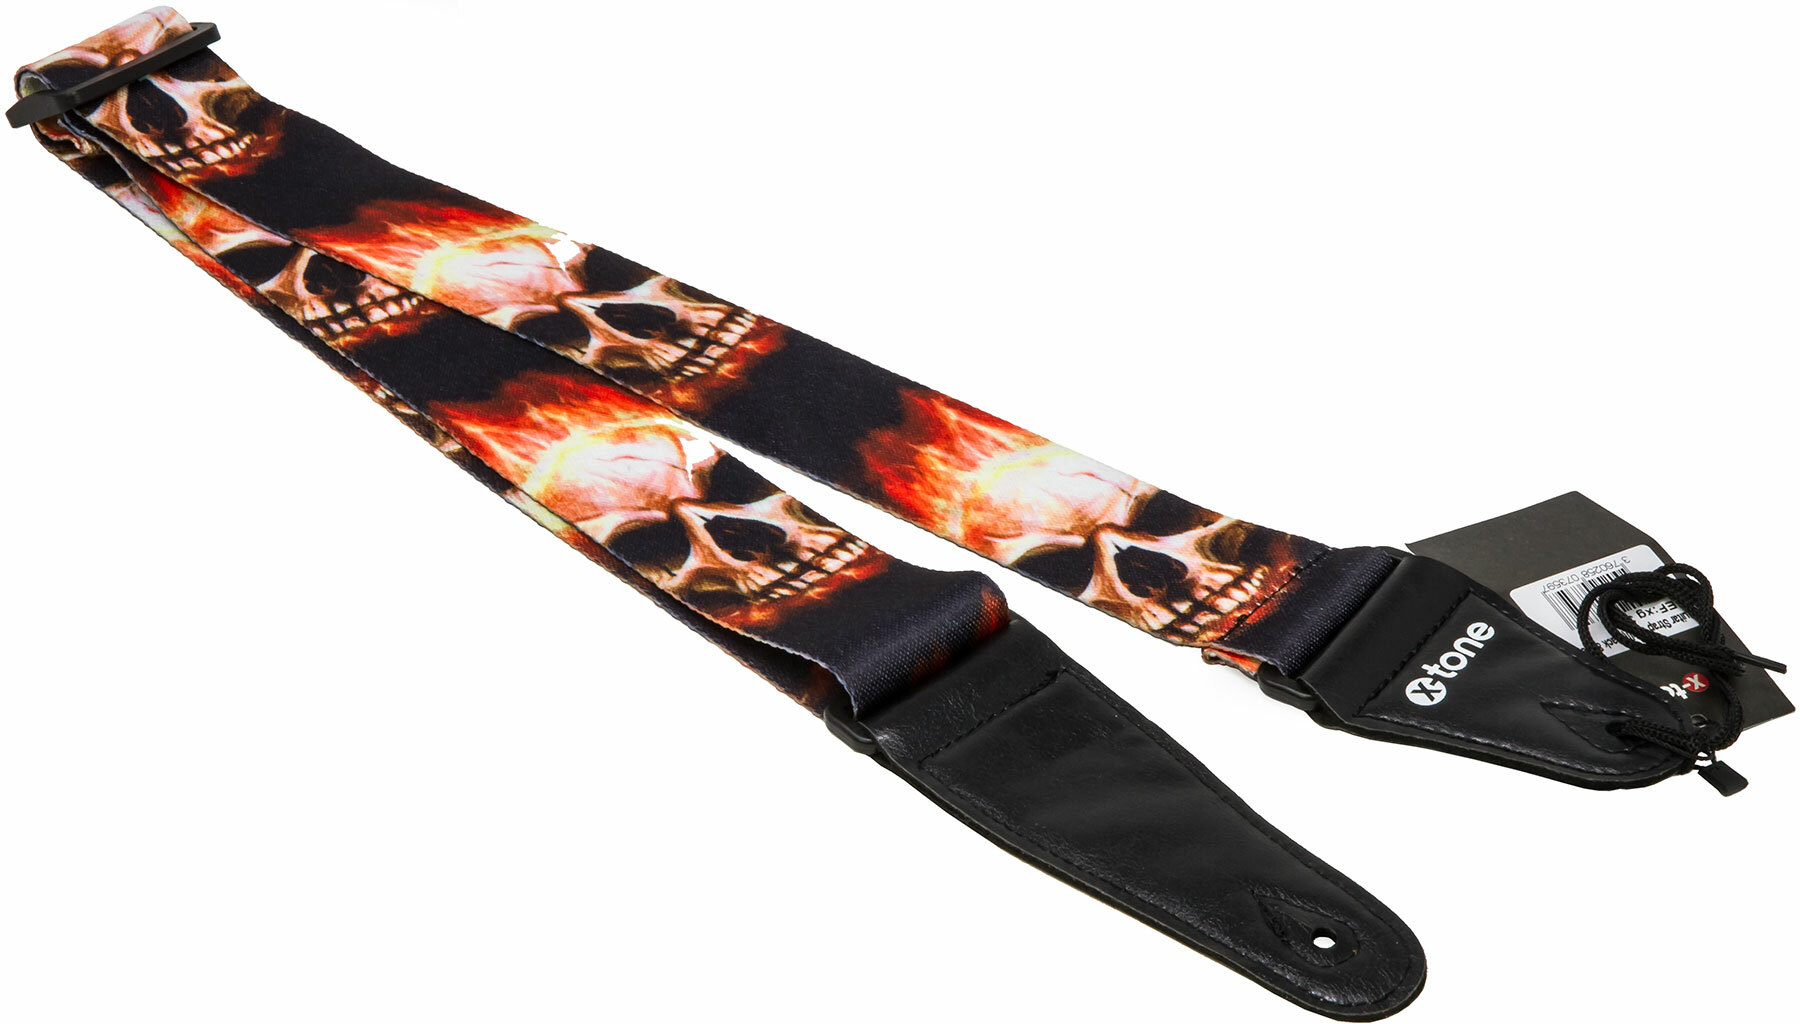 X-tone Xg 3101 Nylon Guitar Strap Skull With Flame Black & Red - Guitar strap - Main picture